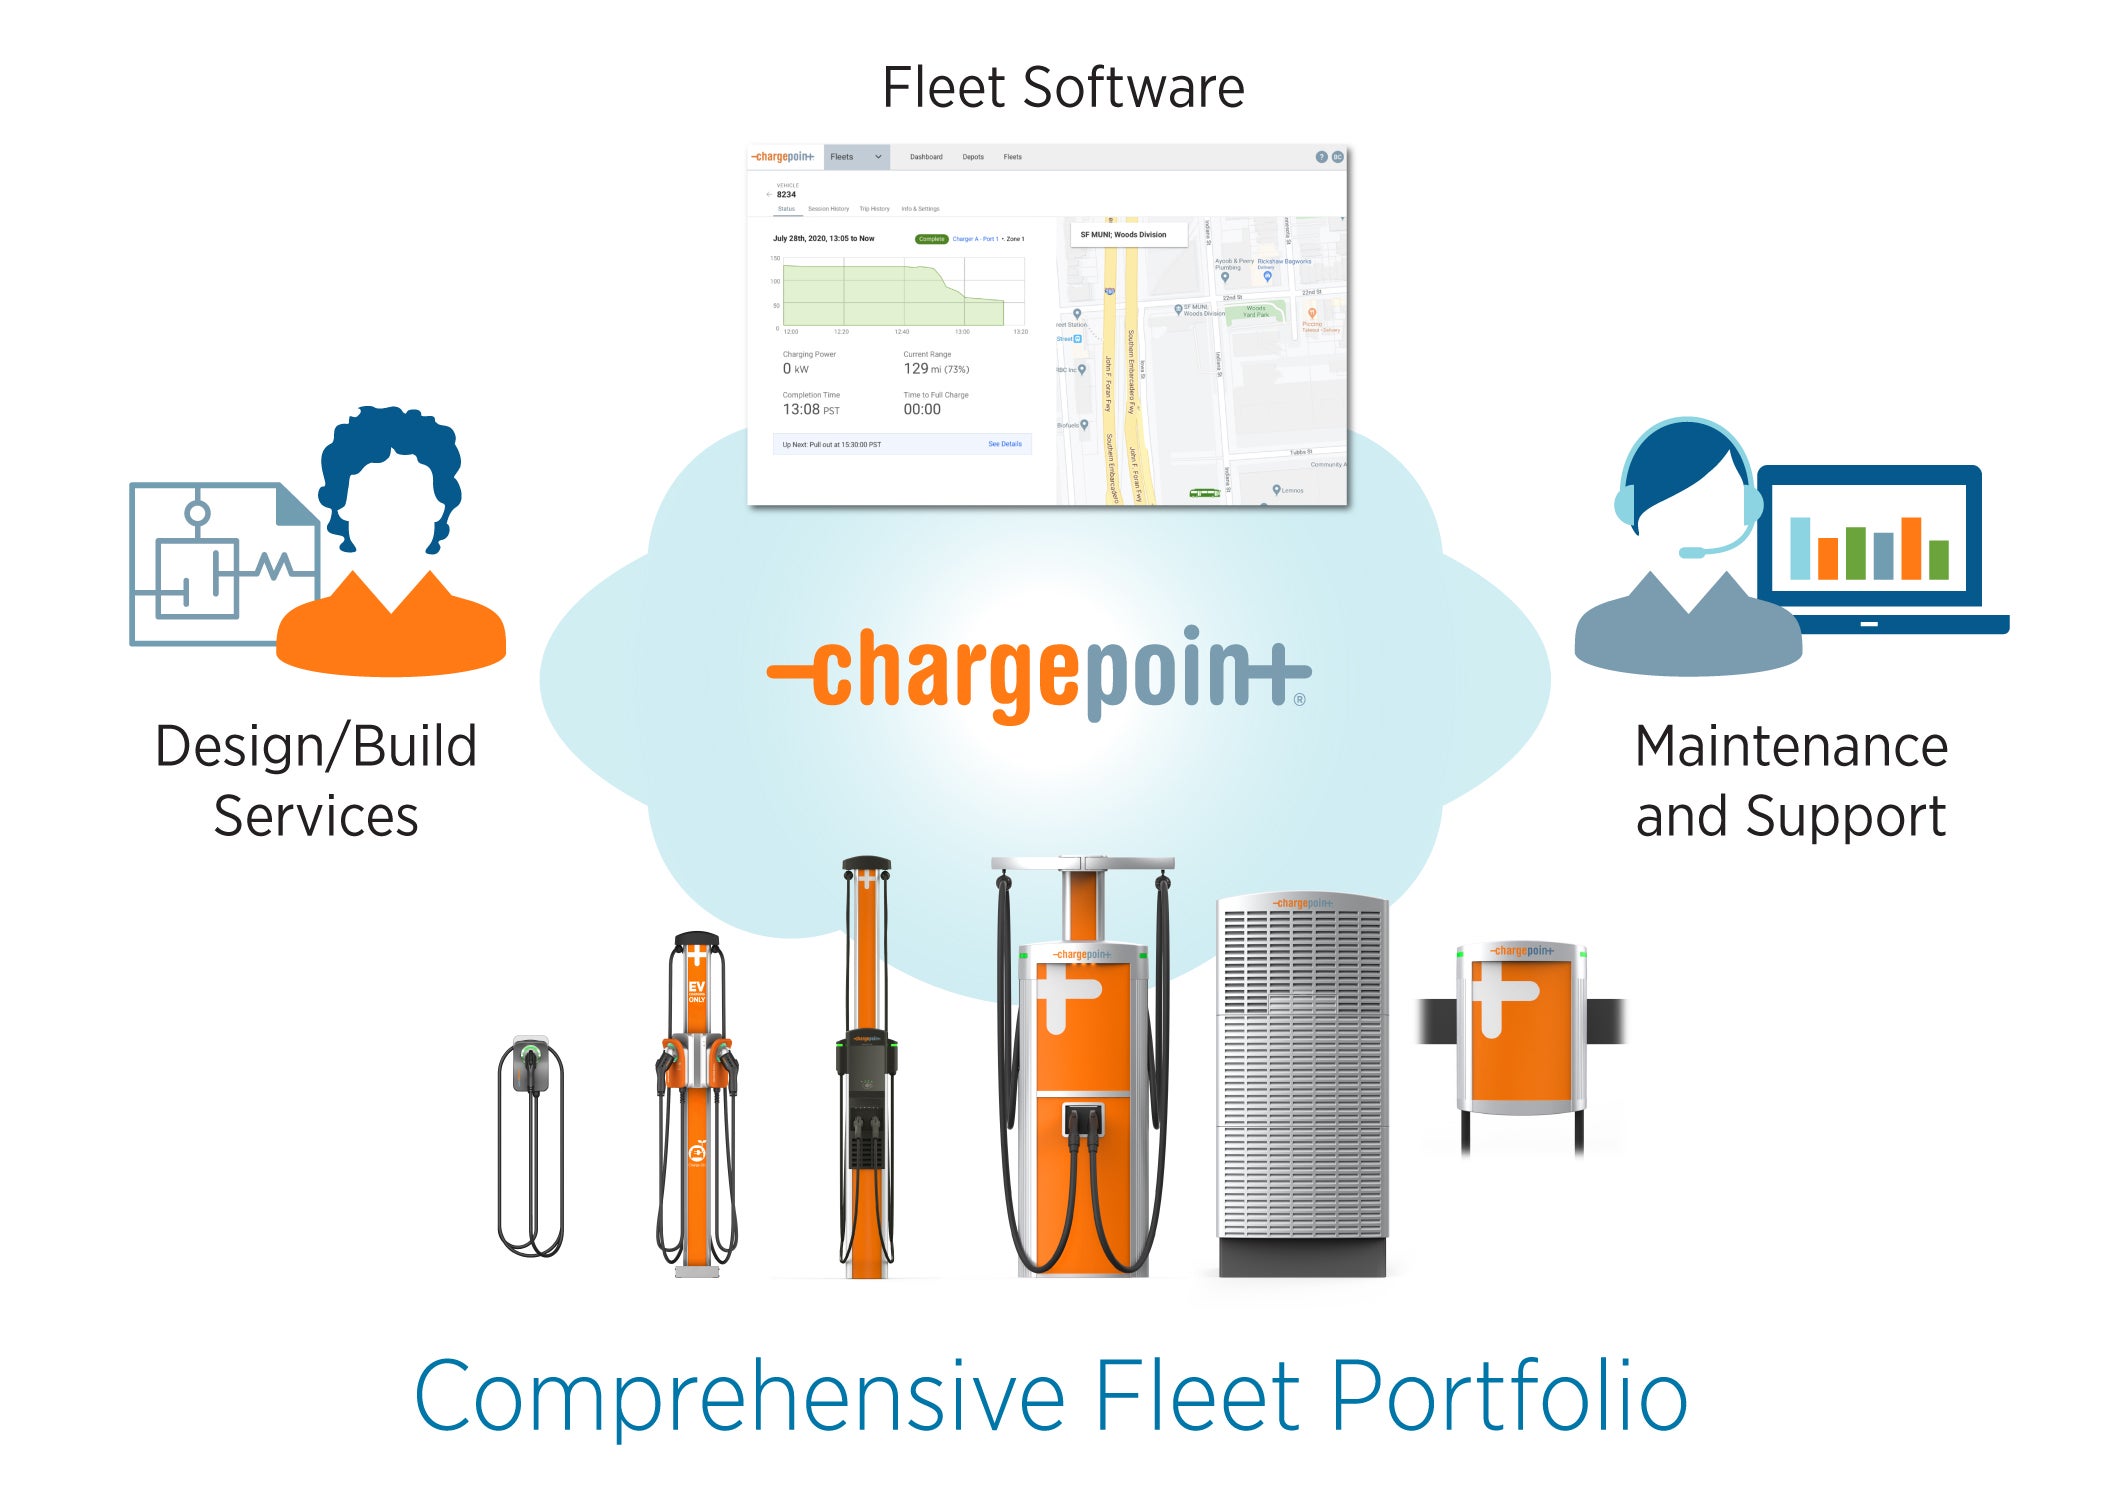 Integrated fleet management, services and scalable charging solutions optimize depot, on-route and at-home charging to keep all fleet vehicles charged and ready